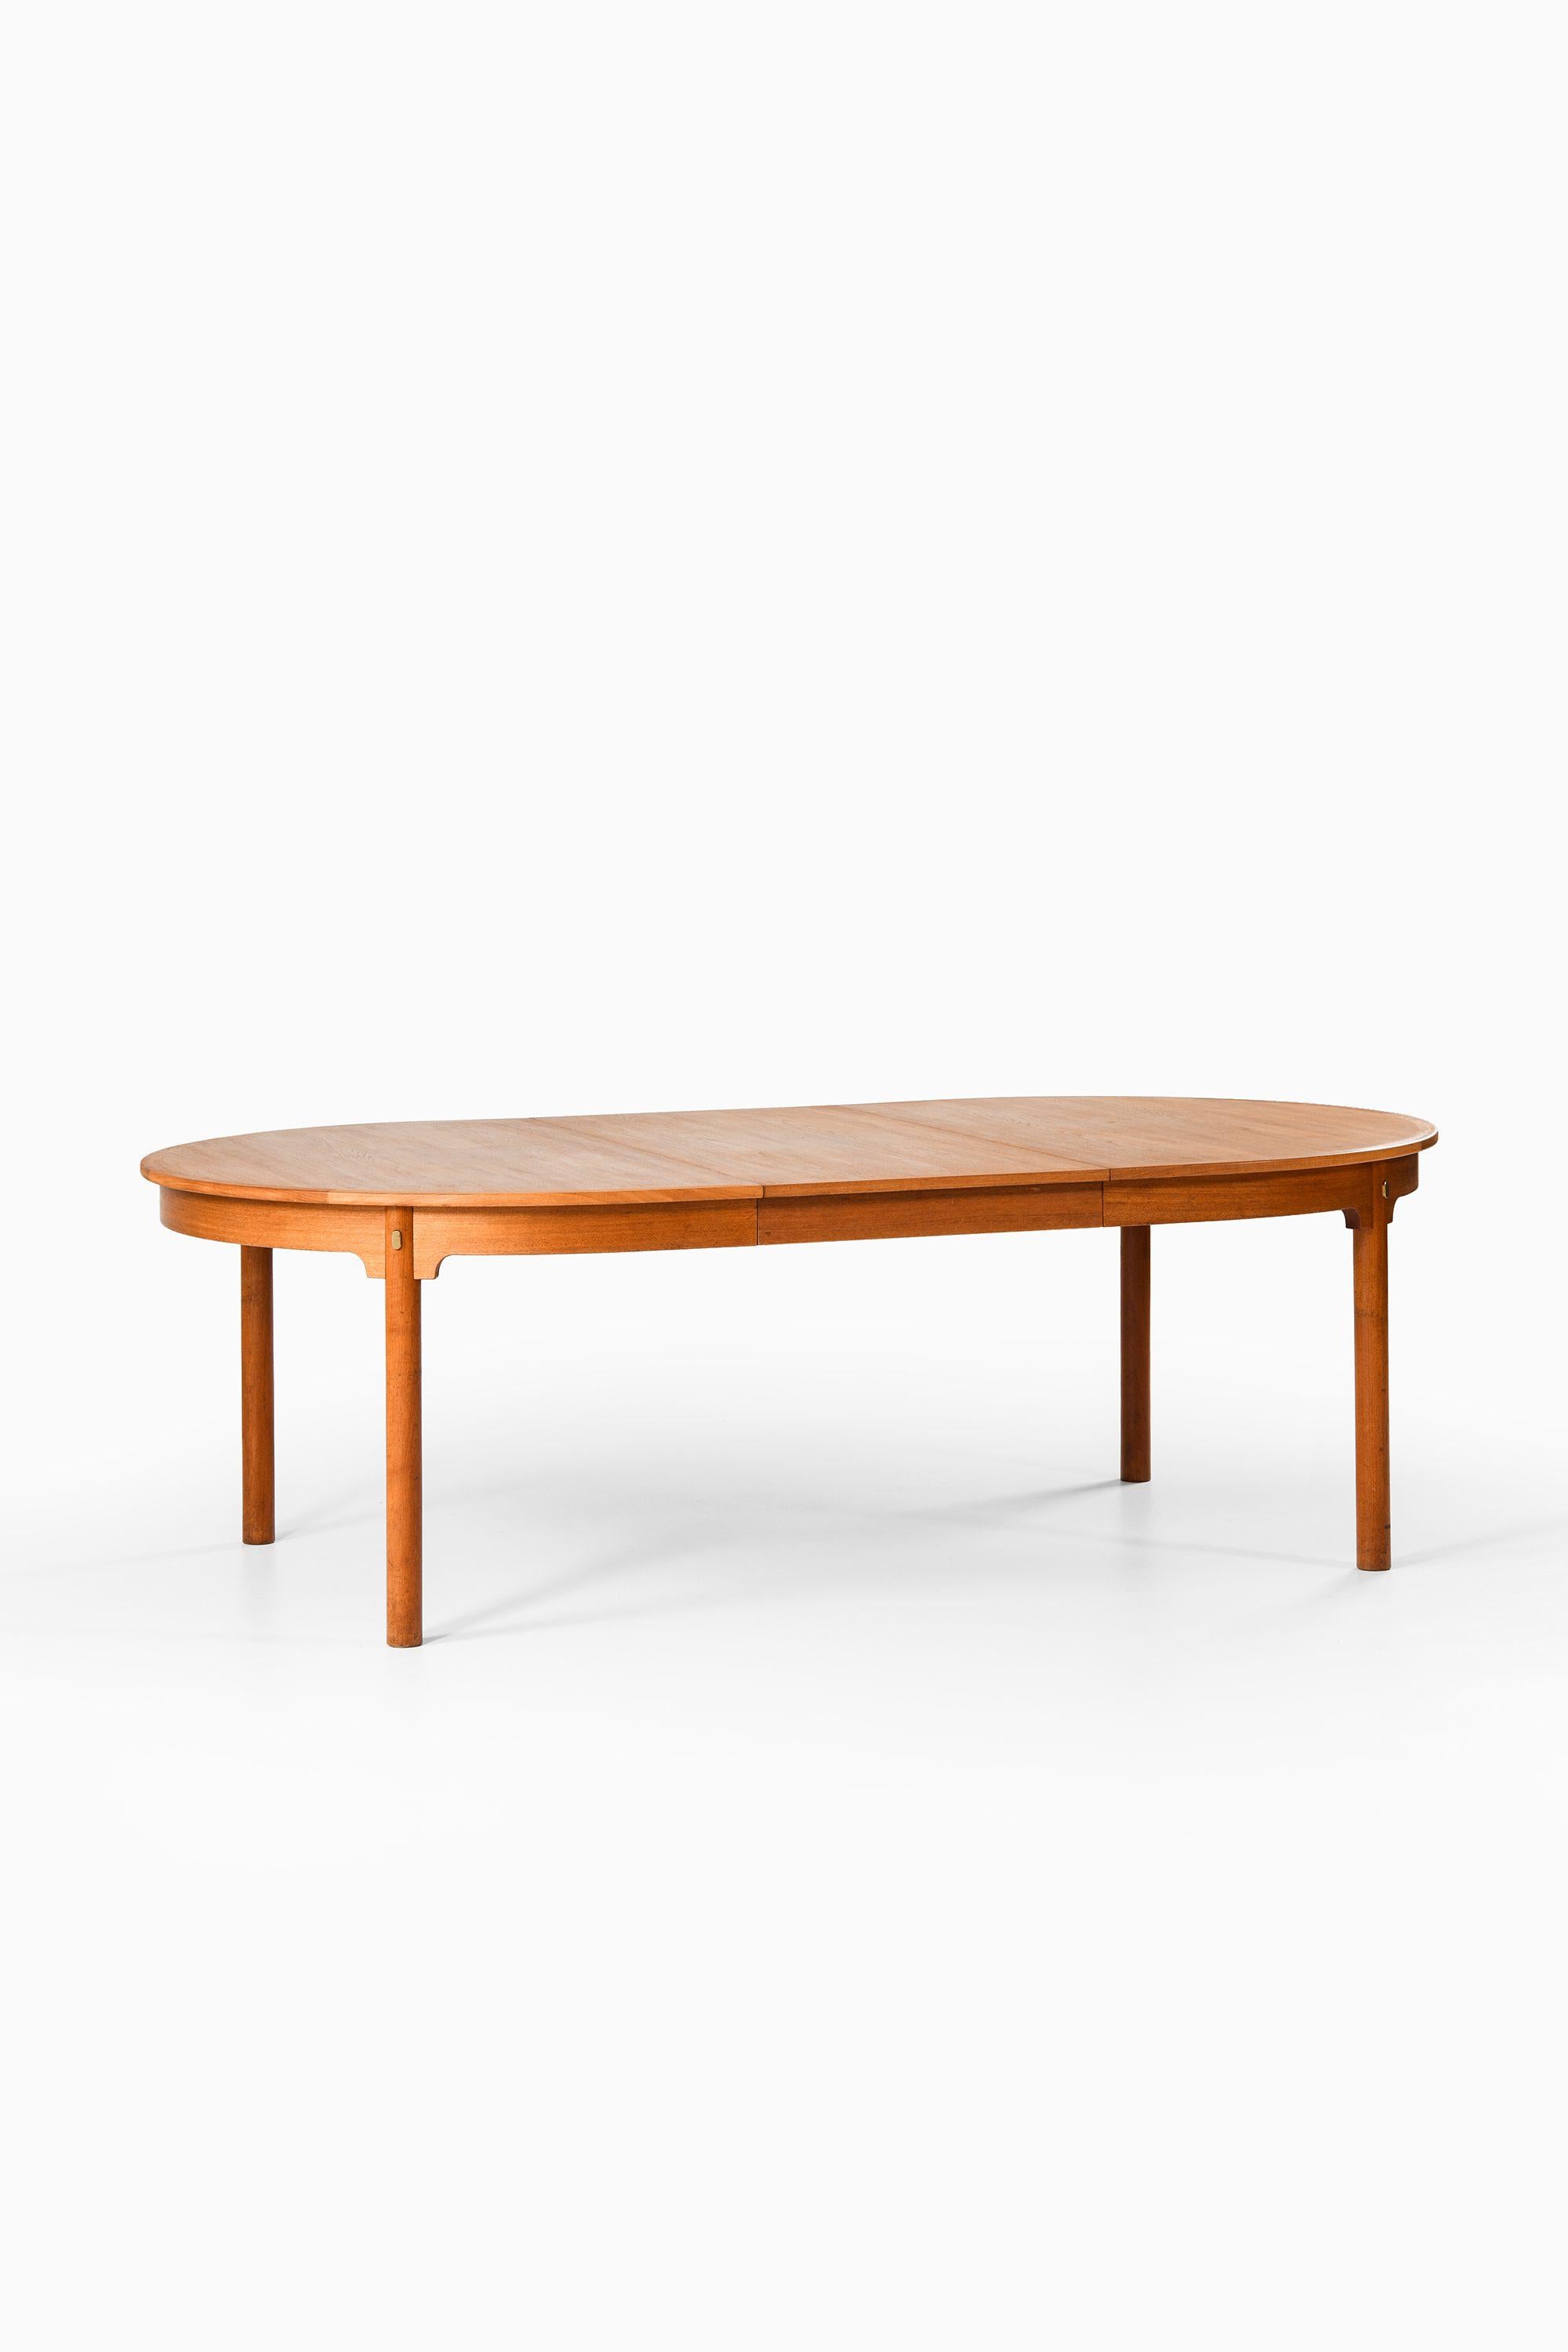 Dining Table in Teak and Brass by Børge Mogensen, 1959

Additional Information:
Material: Teak and brass
Style: Mid century, Scandinavian
Rare dining table model Öresund
Produced by Karl Andersson & Söner in Sweden
Dimensions (W x D x H): 170 [230]